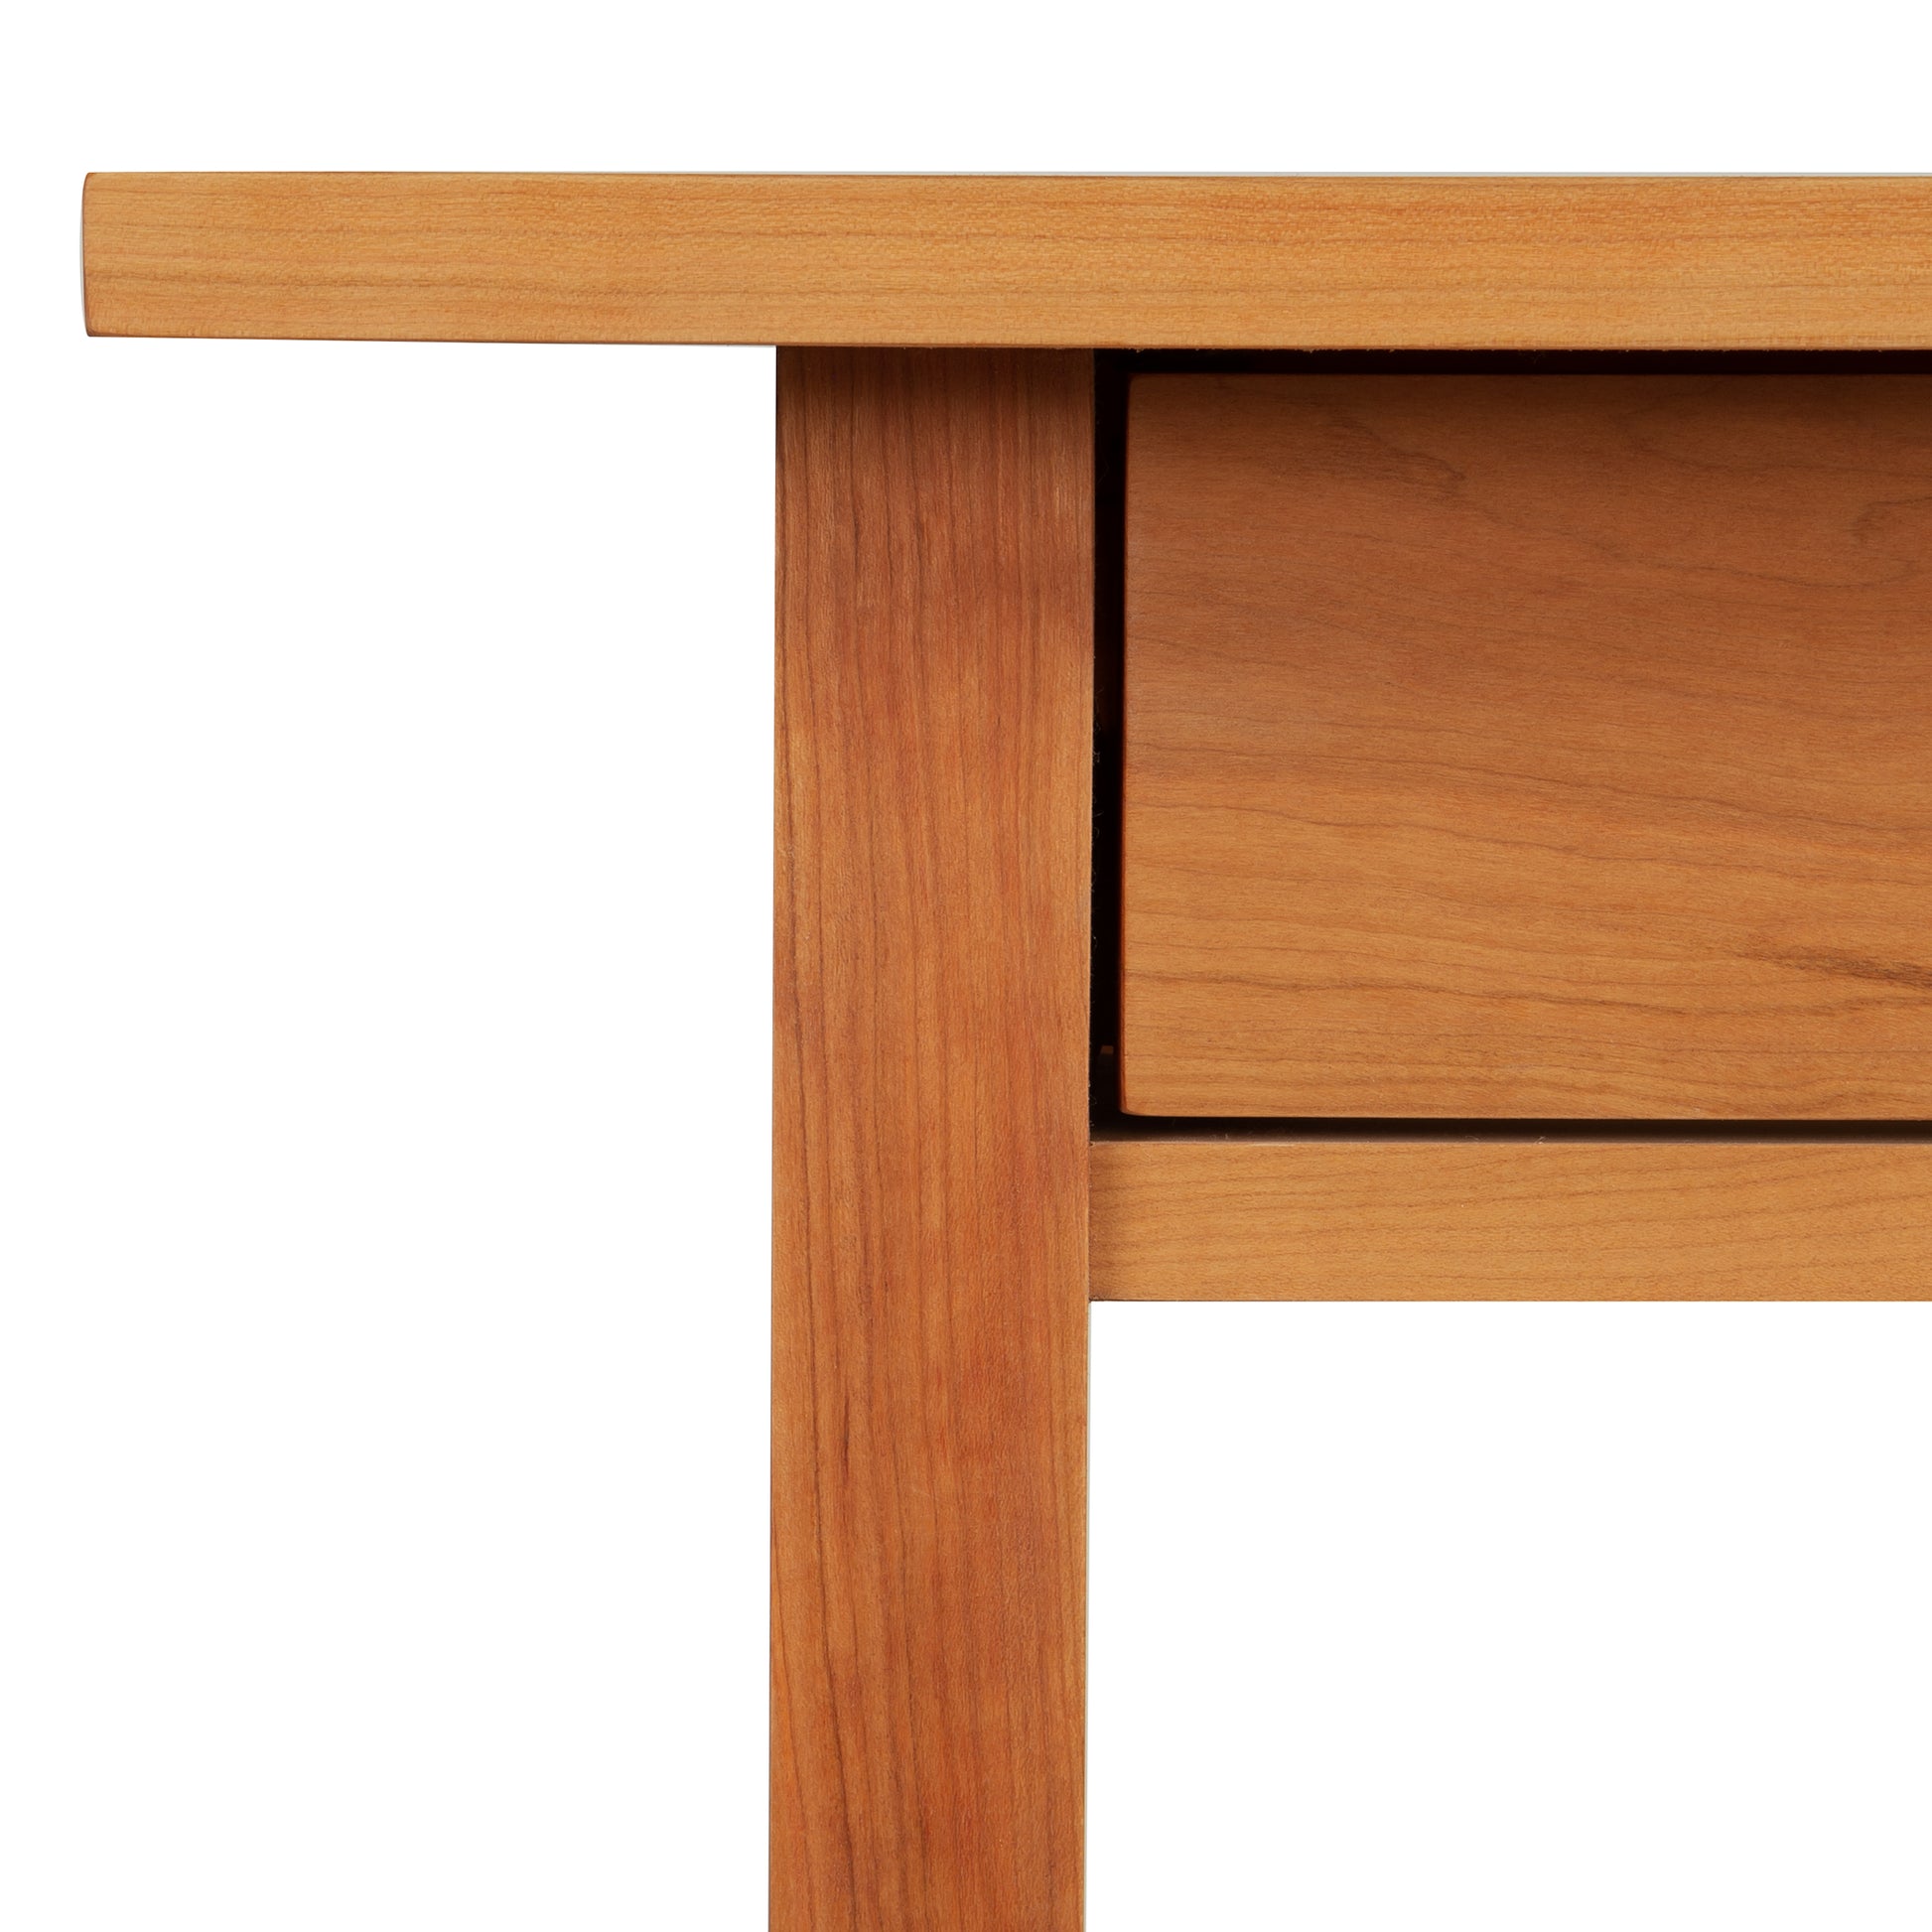 A Burlington Shaker 2-Drawer Coffee Table by Vermont Furniture Designs with a single closed drawer, isolated against a white background.